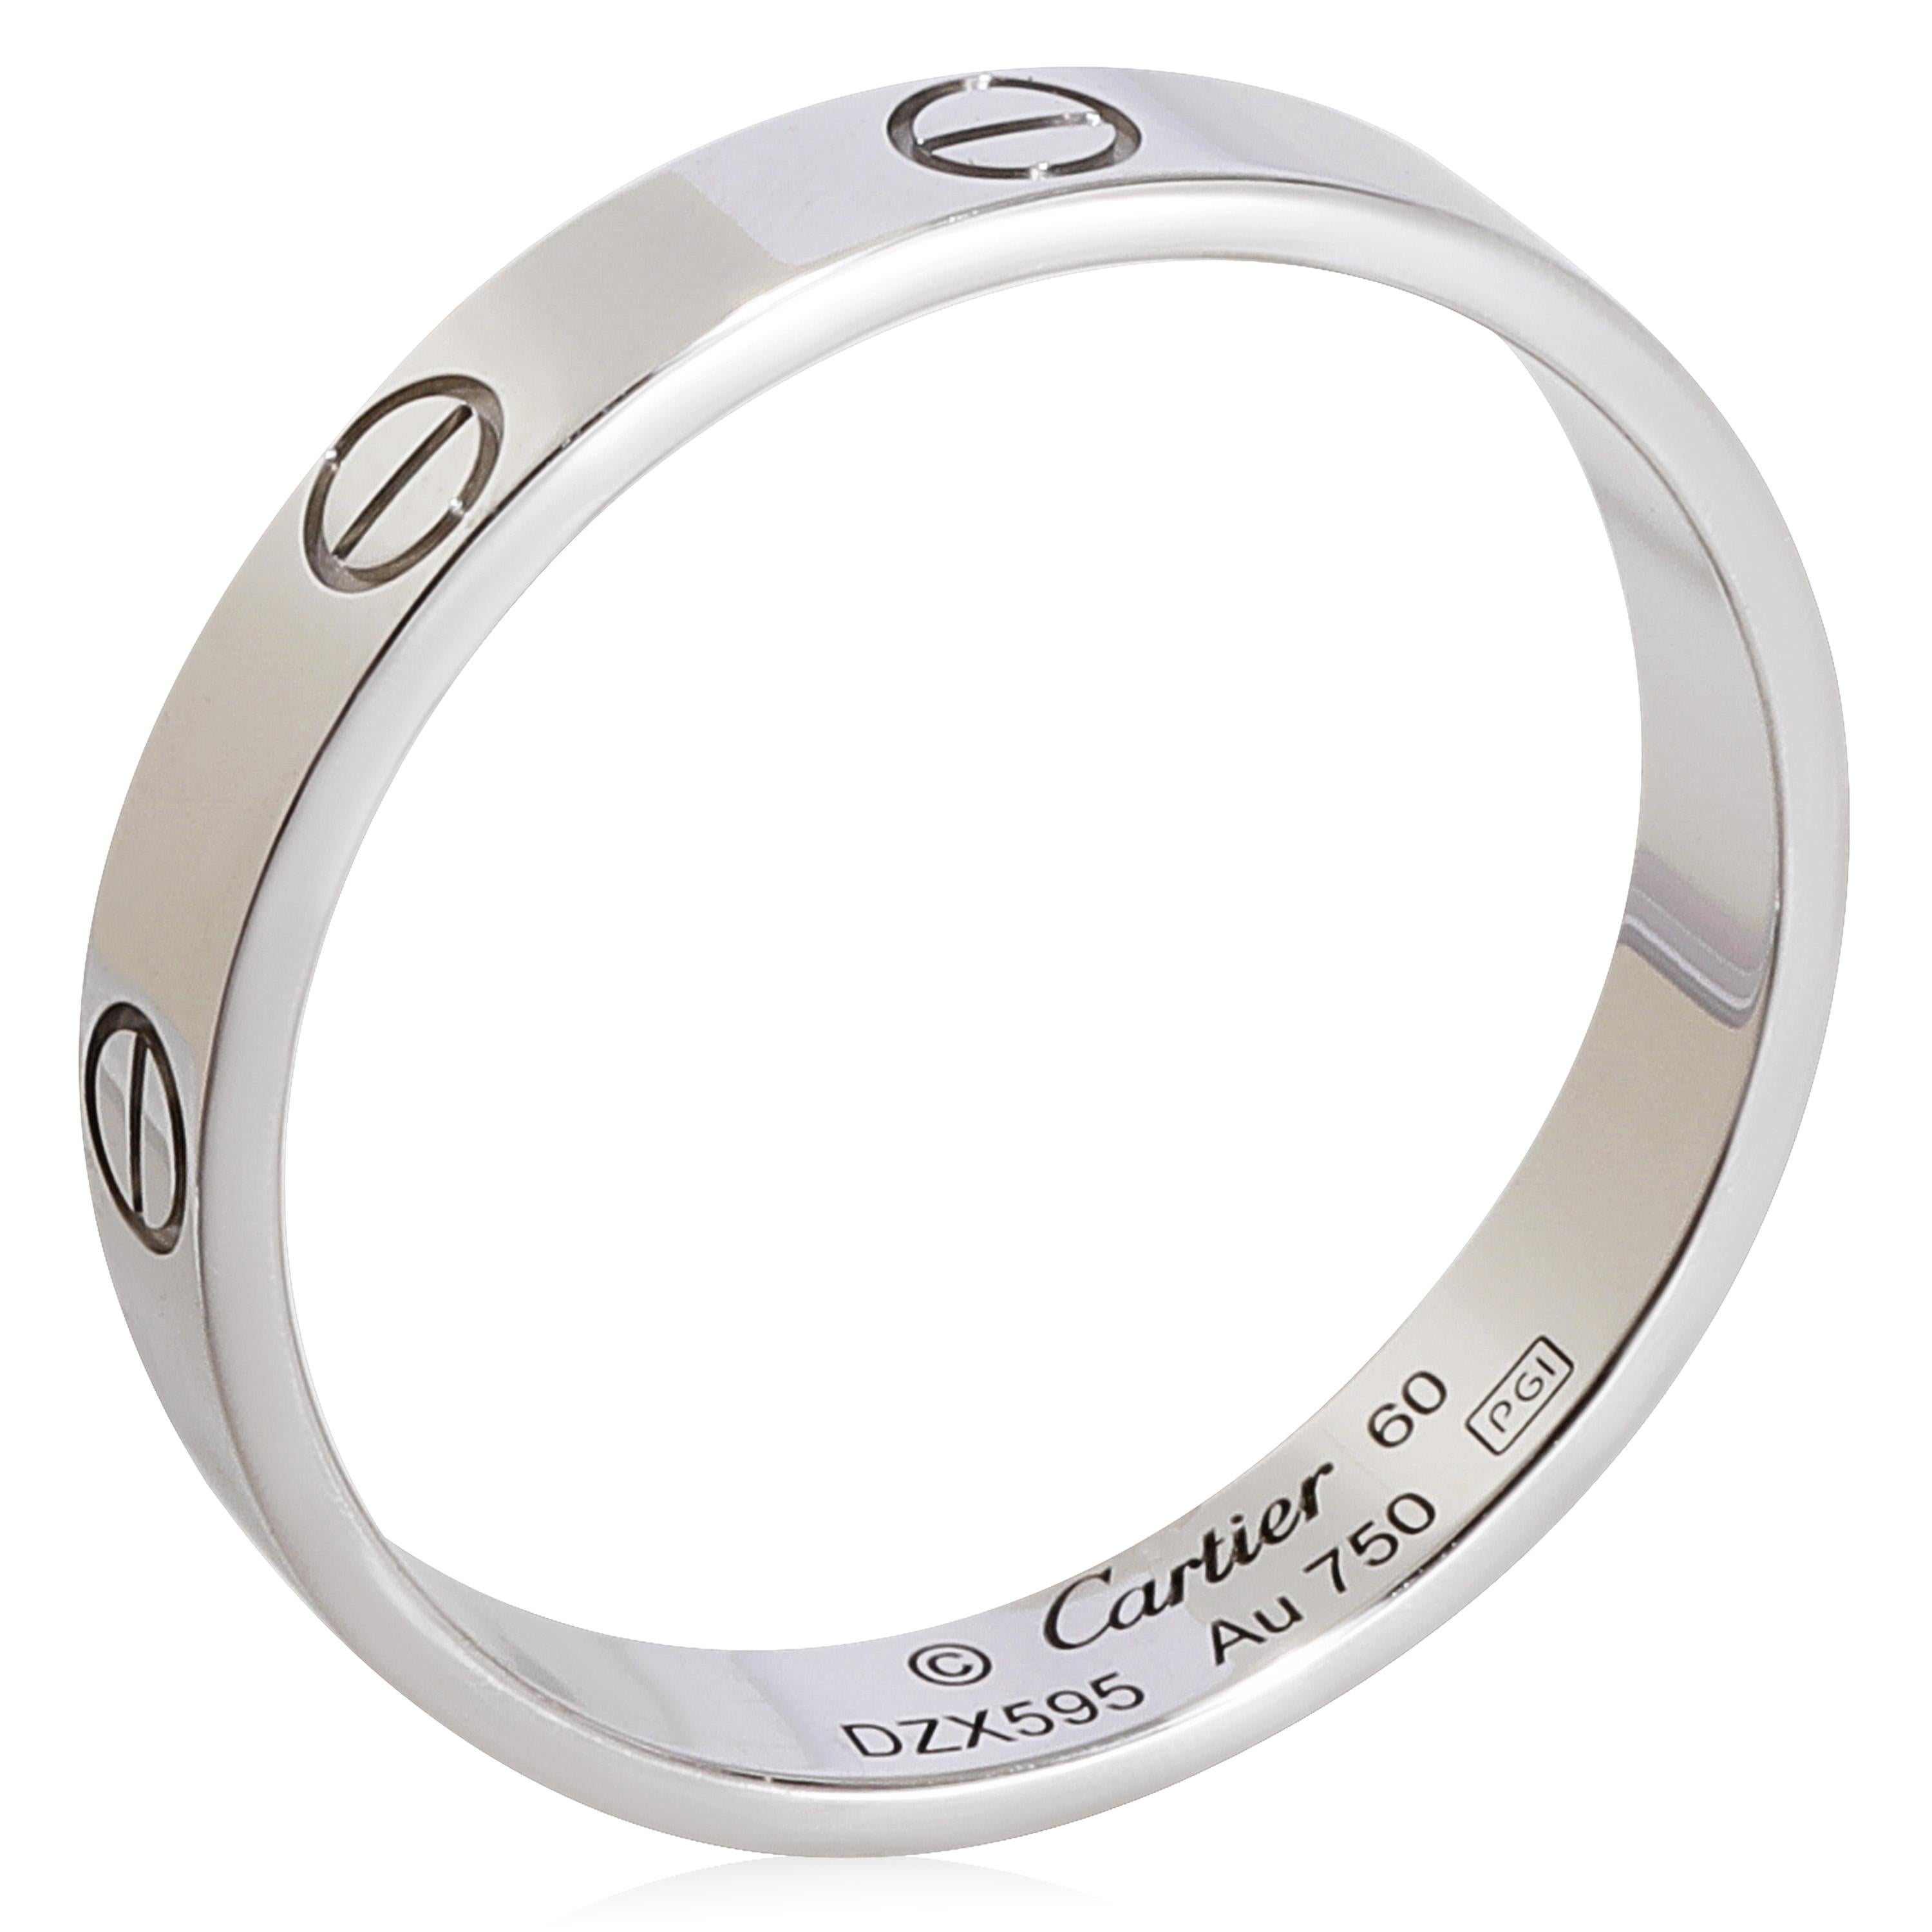 Cartier Love Wedding Band in 18k White Gold

PRIMARY DETAILS
SKU: 125065
Listing Title: Cartier Love Wedding Band in 18k White Gold
Condition Description: Retails for 1250 USD. In excellent condition and recently polished. Ring size is 9.0. Comes